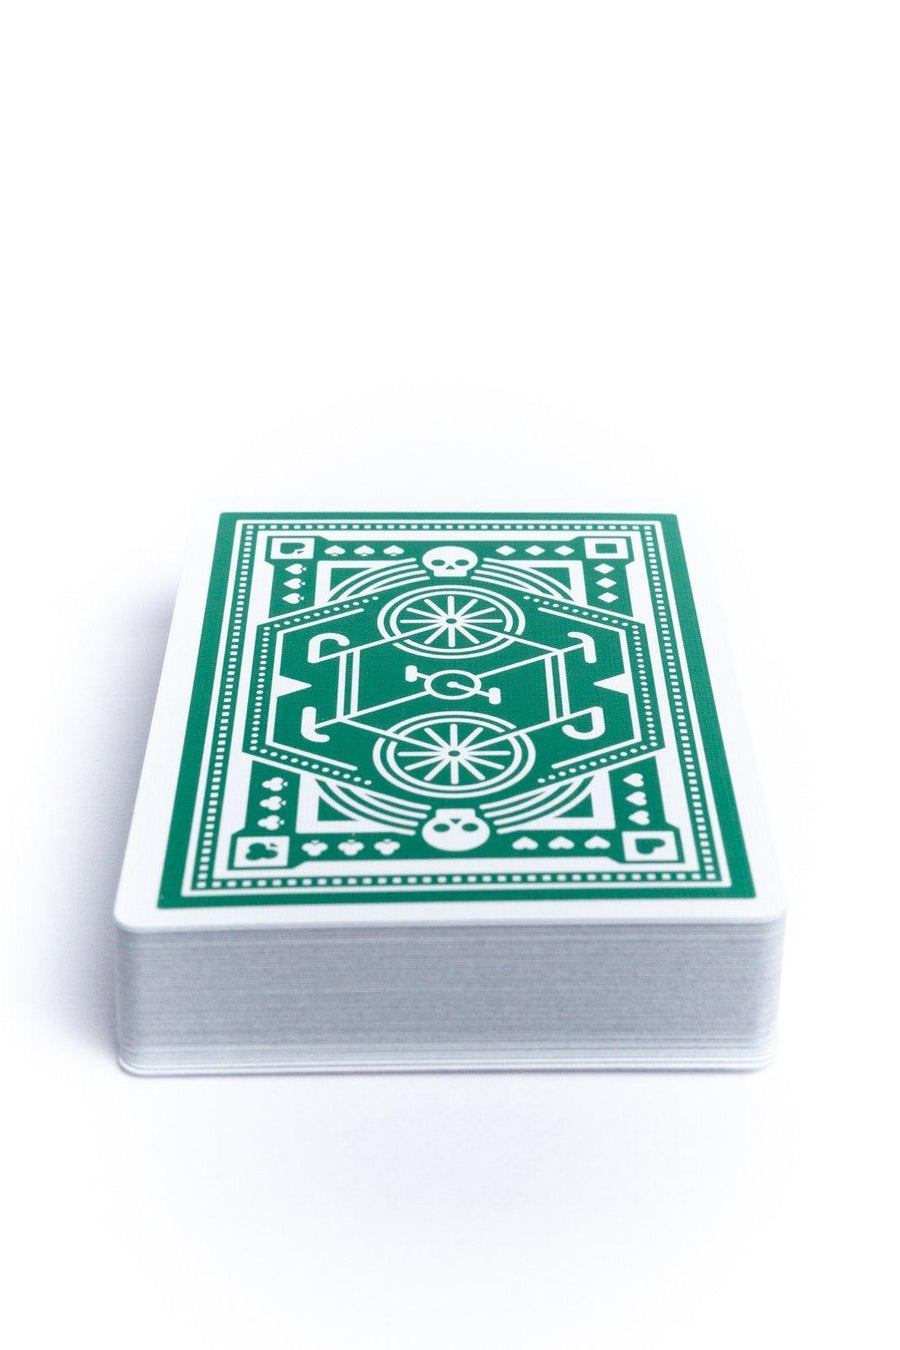 Green Wheel Limited Edition Playing Cards by Art of Play